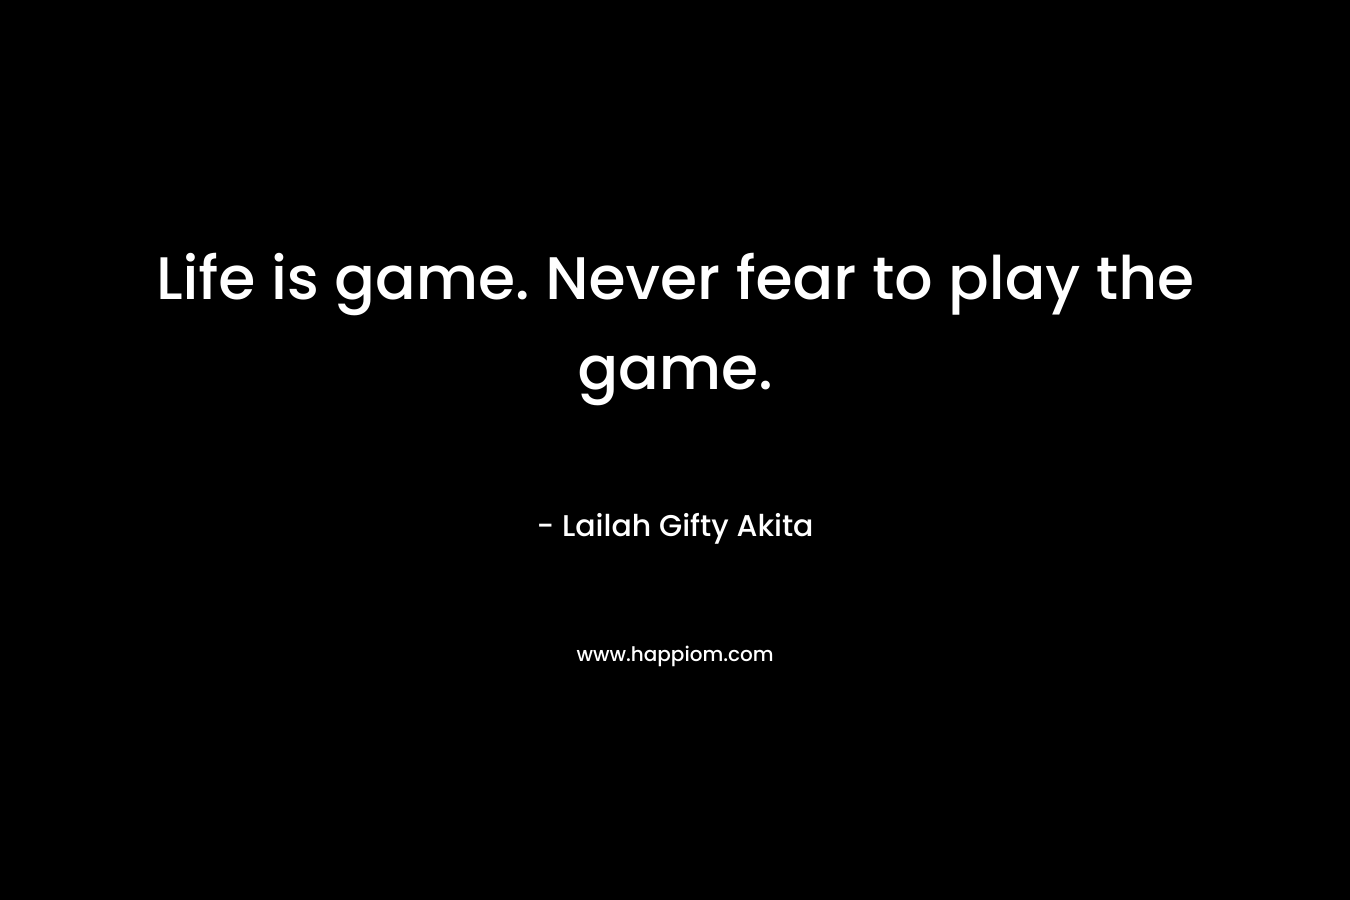 Life is game. Never fear to play the game.